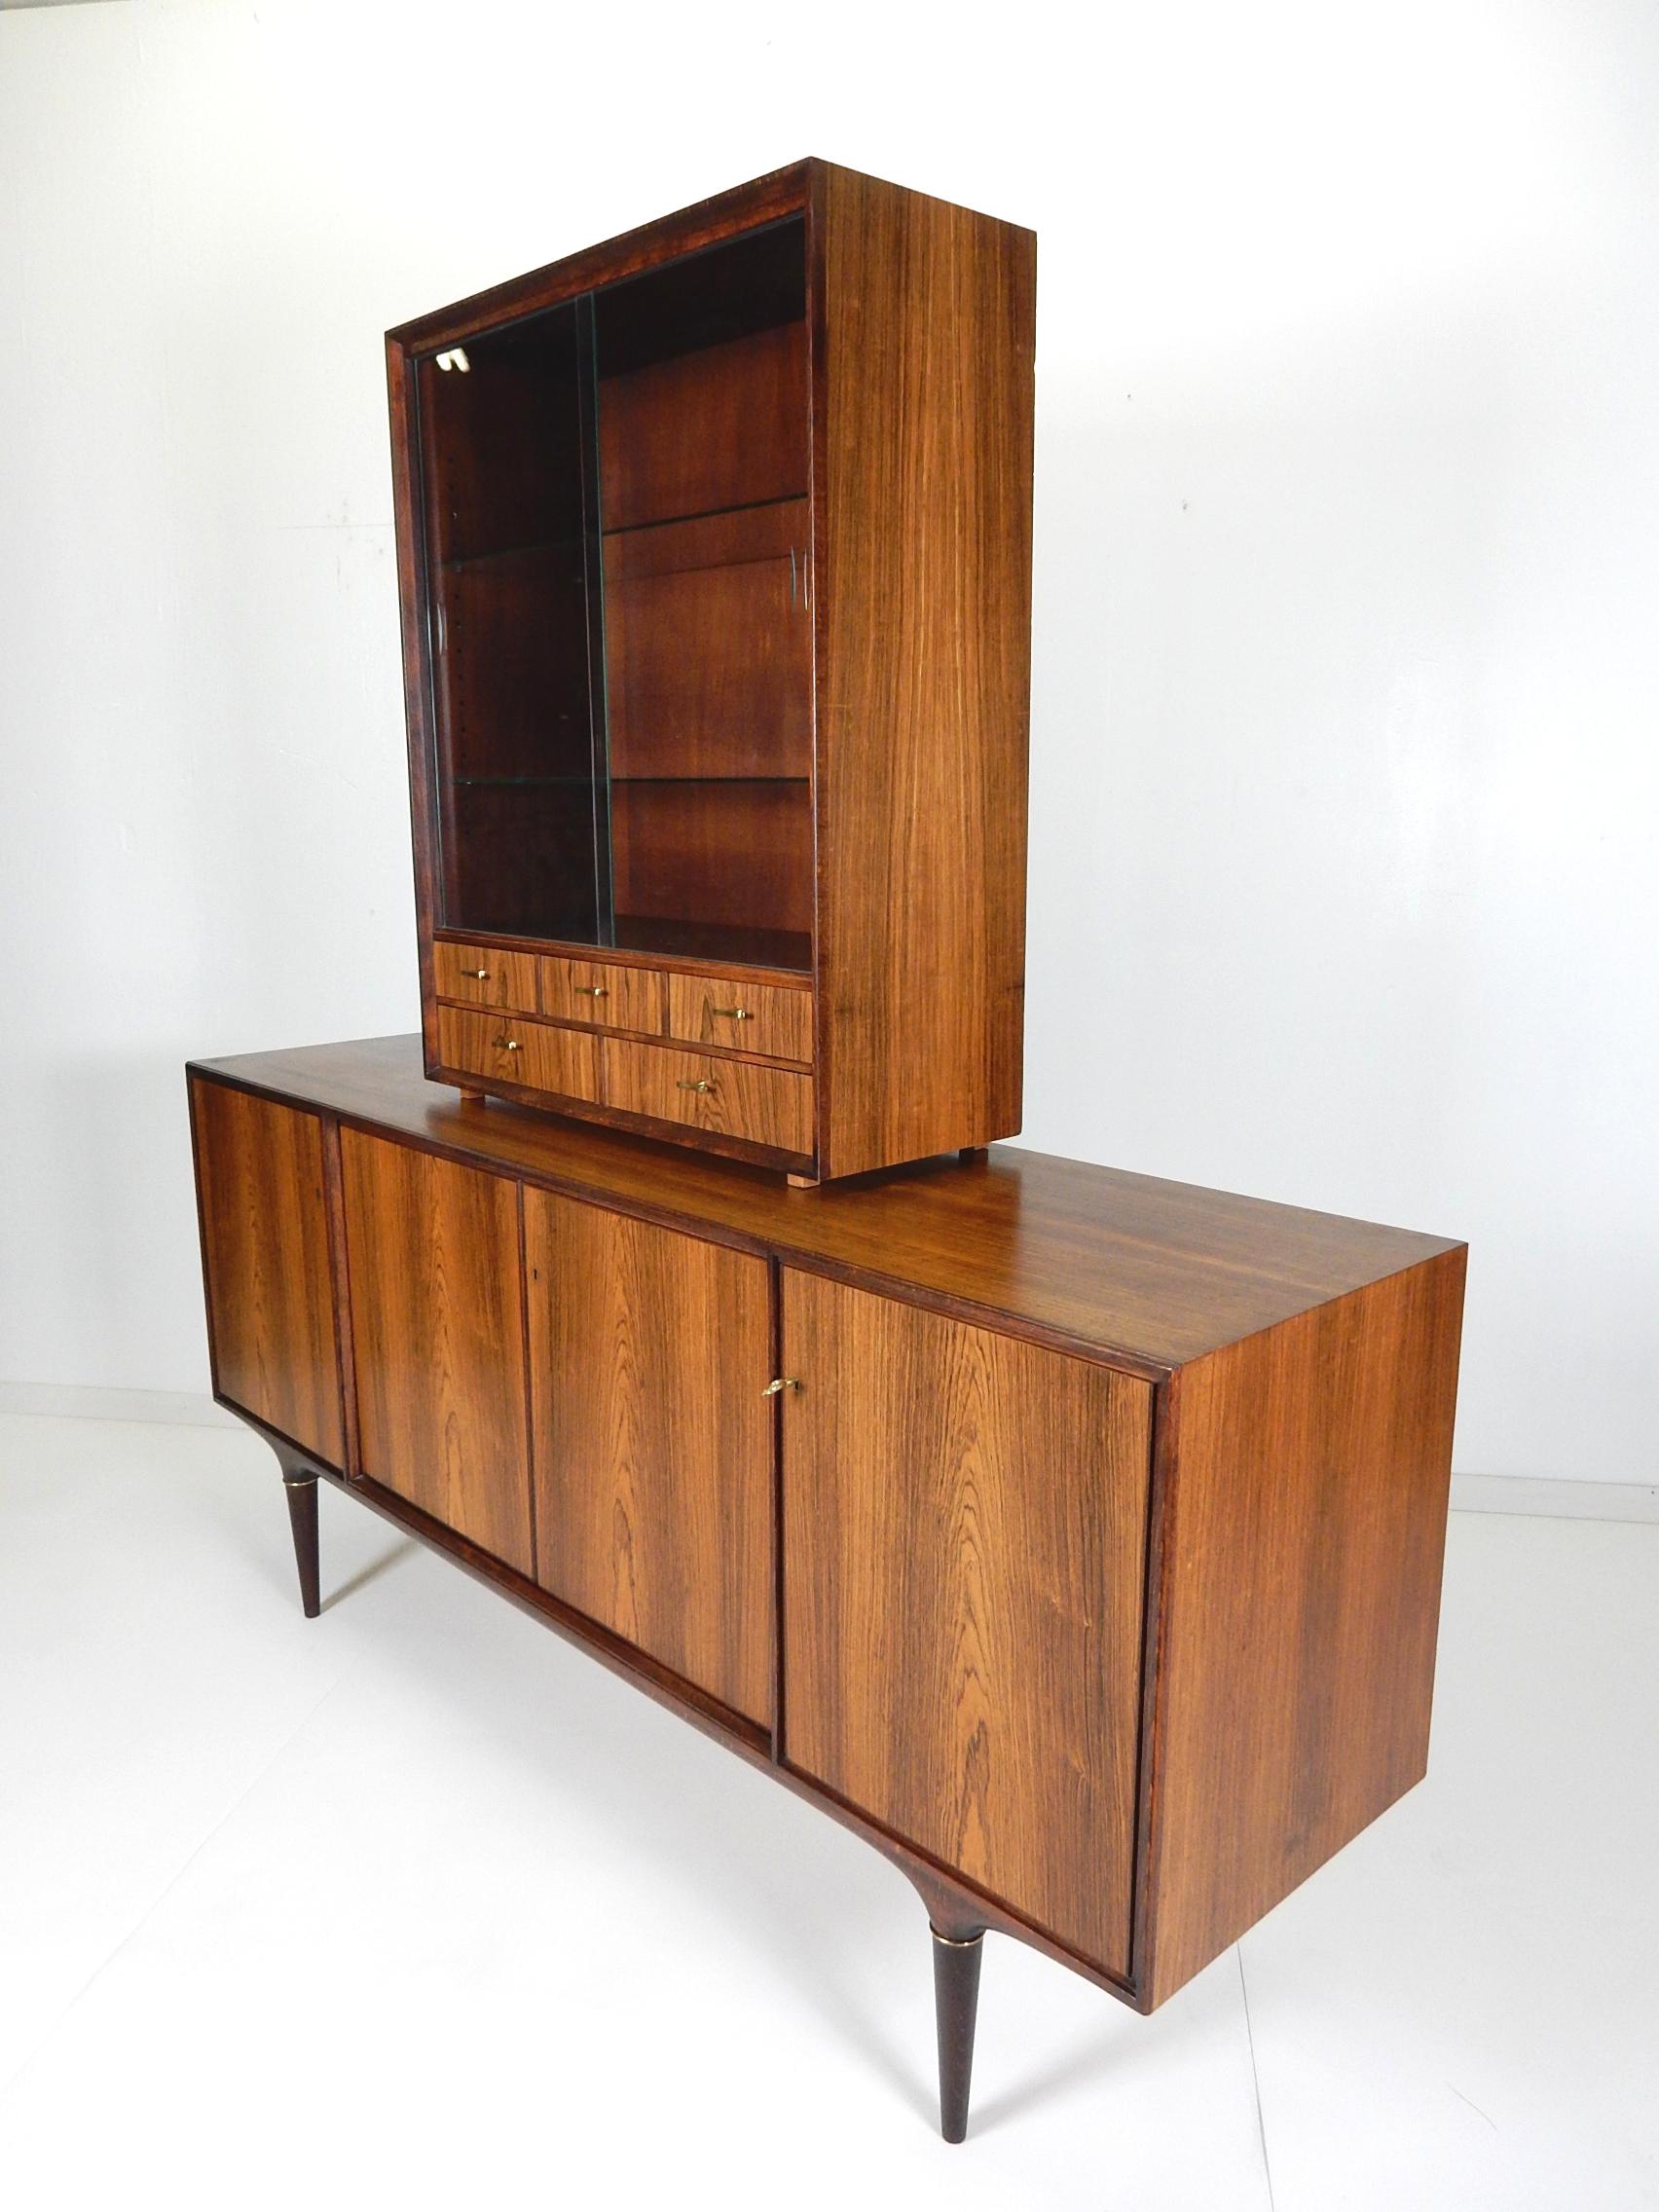 Sensational midcentury 2-tone wood buffet by Svante Skogh of Sweden.
Gorgeous rosewood exterior and secondary birch inside
Key lock cabinet doors opening to storage shelf's in center and right with 6 drawers on left side.
Rare floating footed